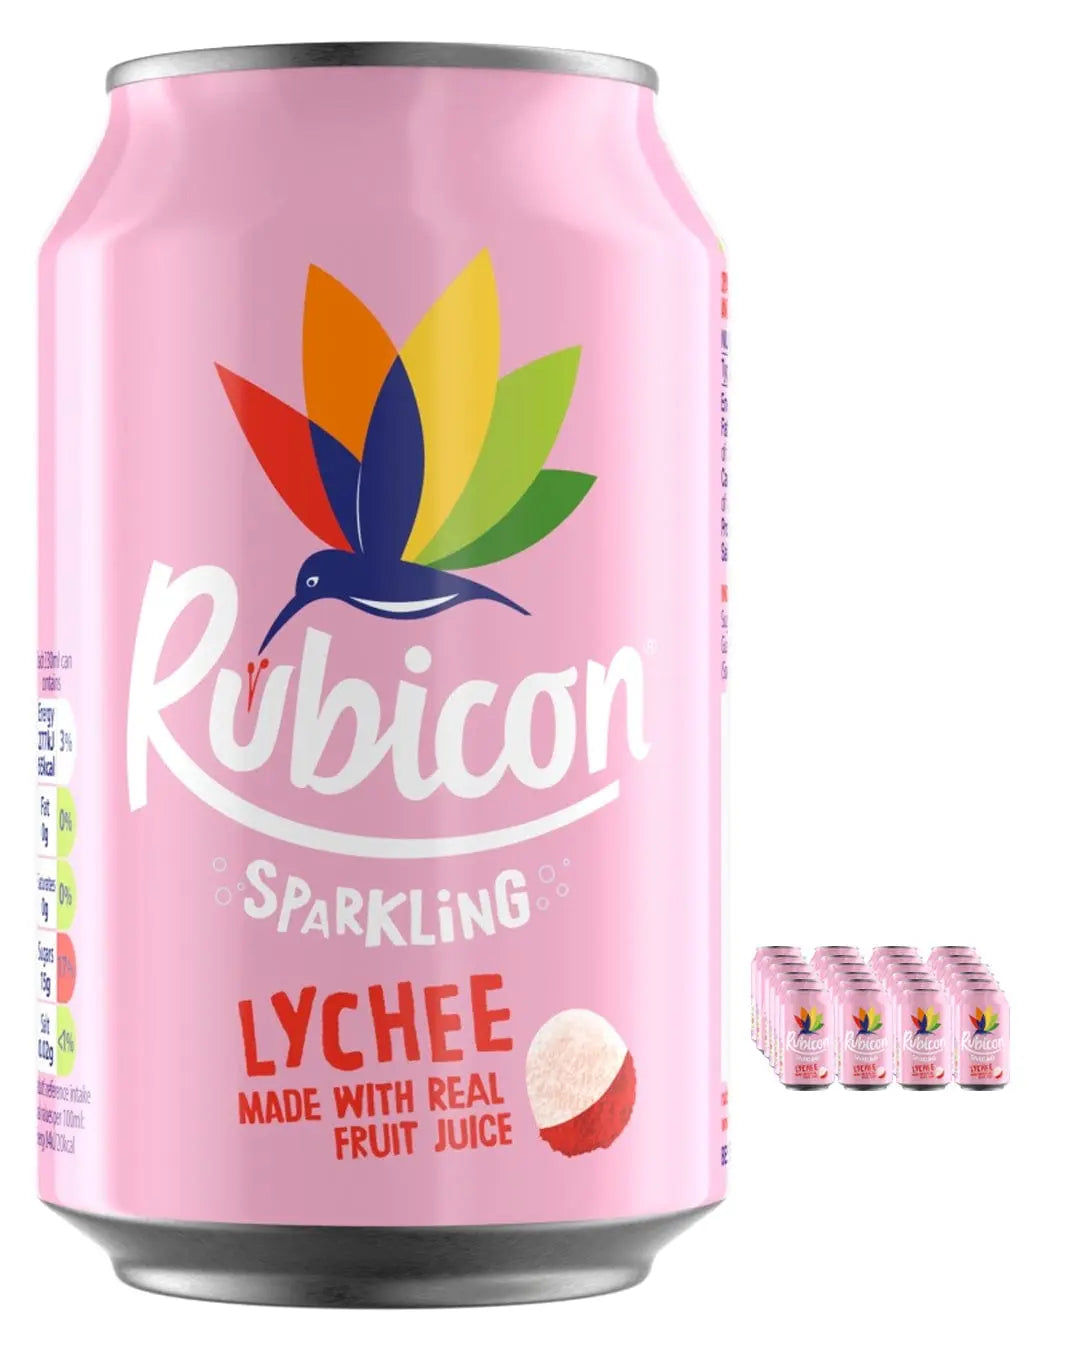 Rubicon Sparkling Lychee Juice Drink Multipack, 24 x 330 ml Soft Drinks & Mixers